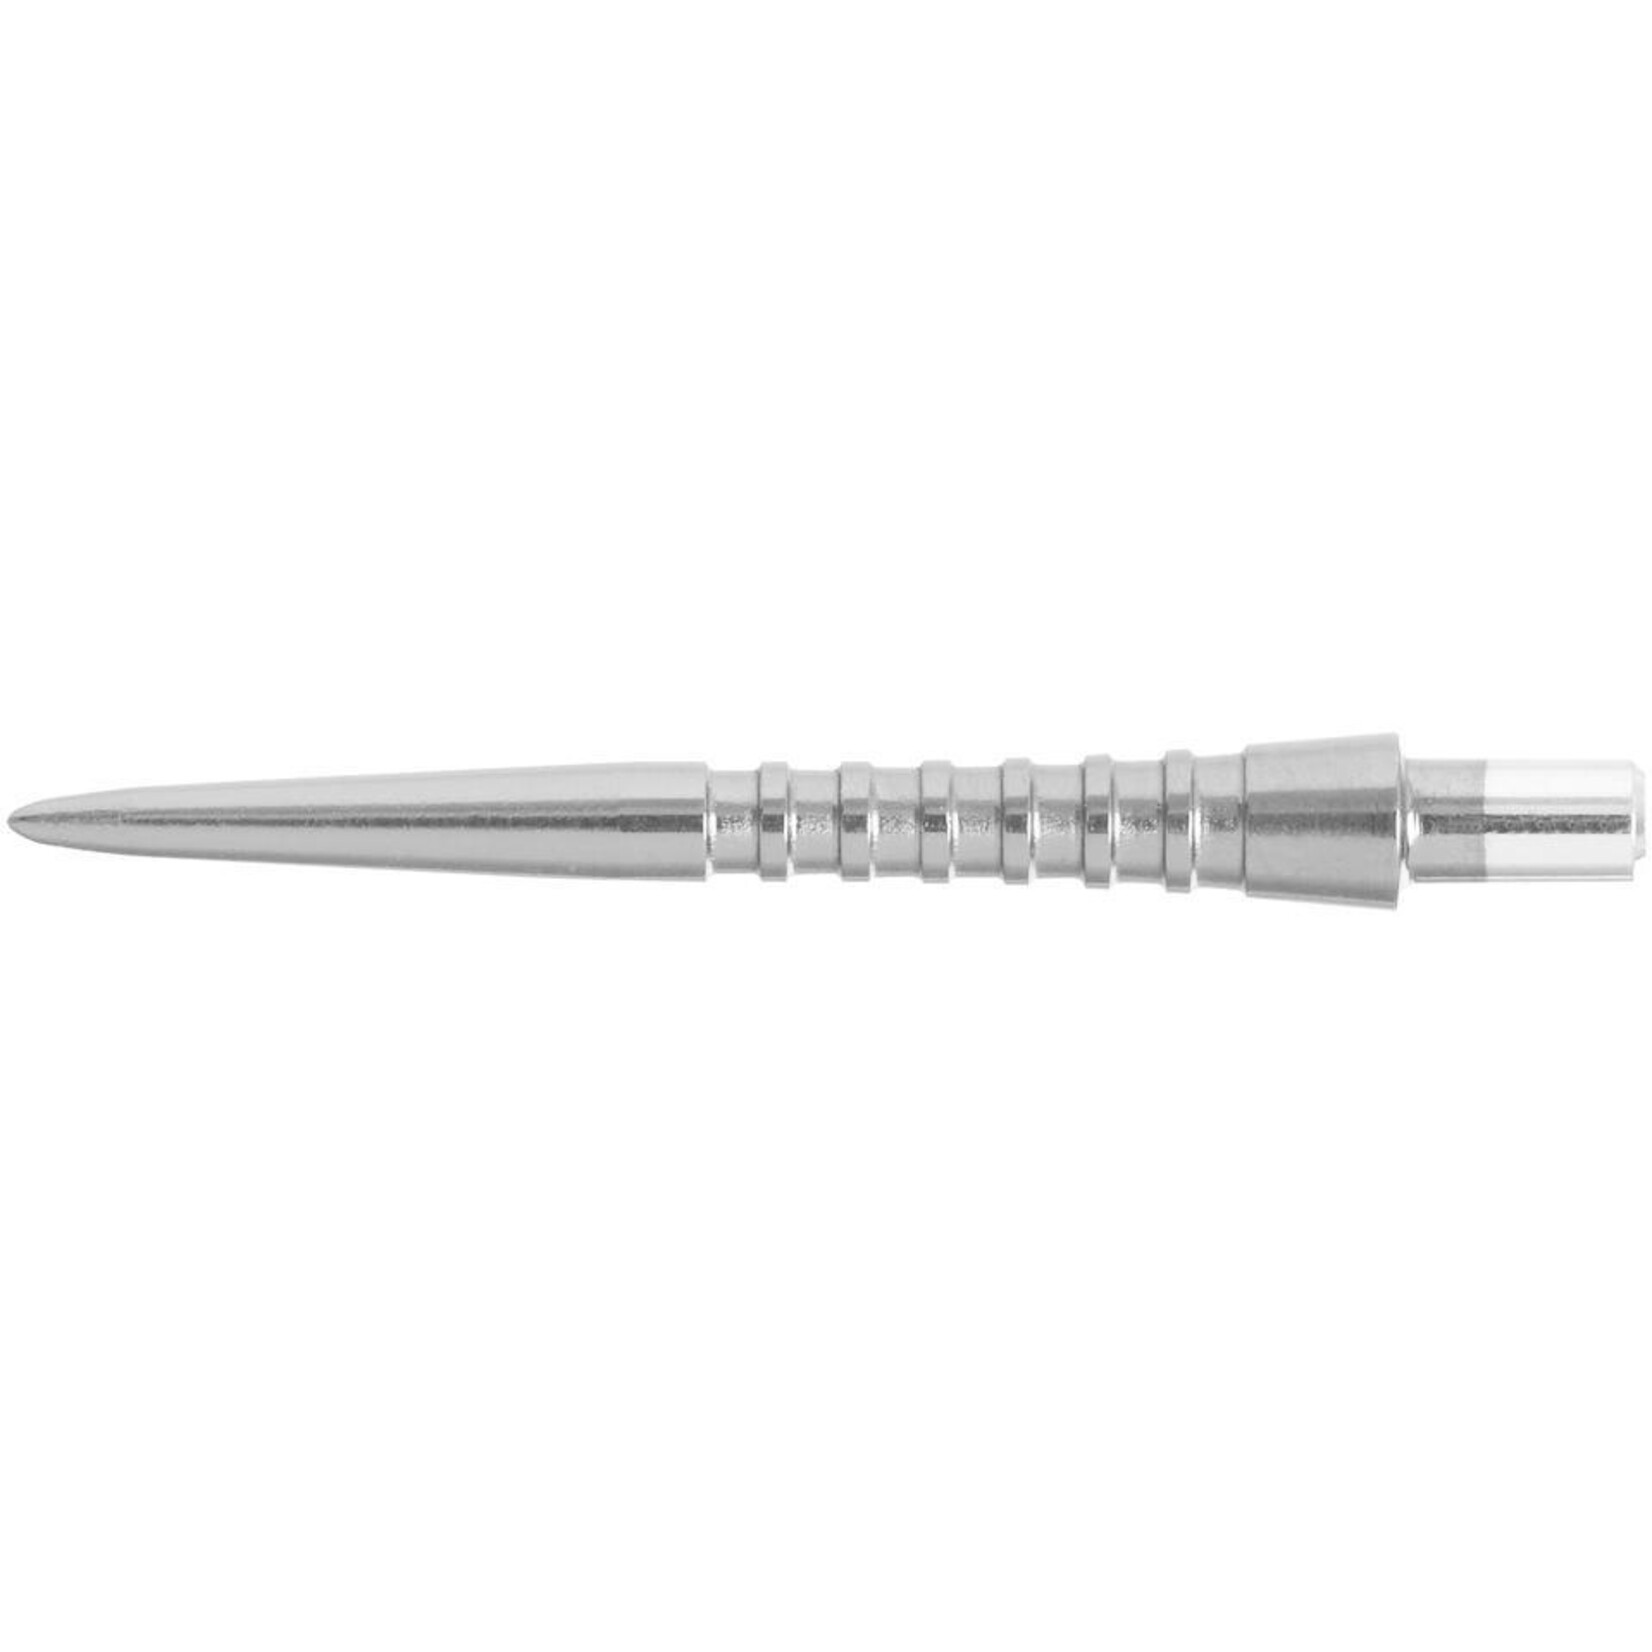 Target Darts Target Storm Grooved Replacement Steel Tip Points